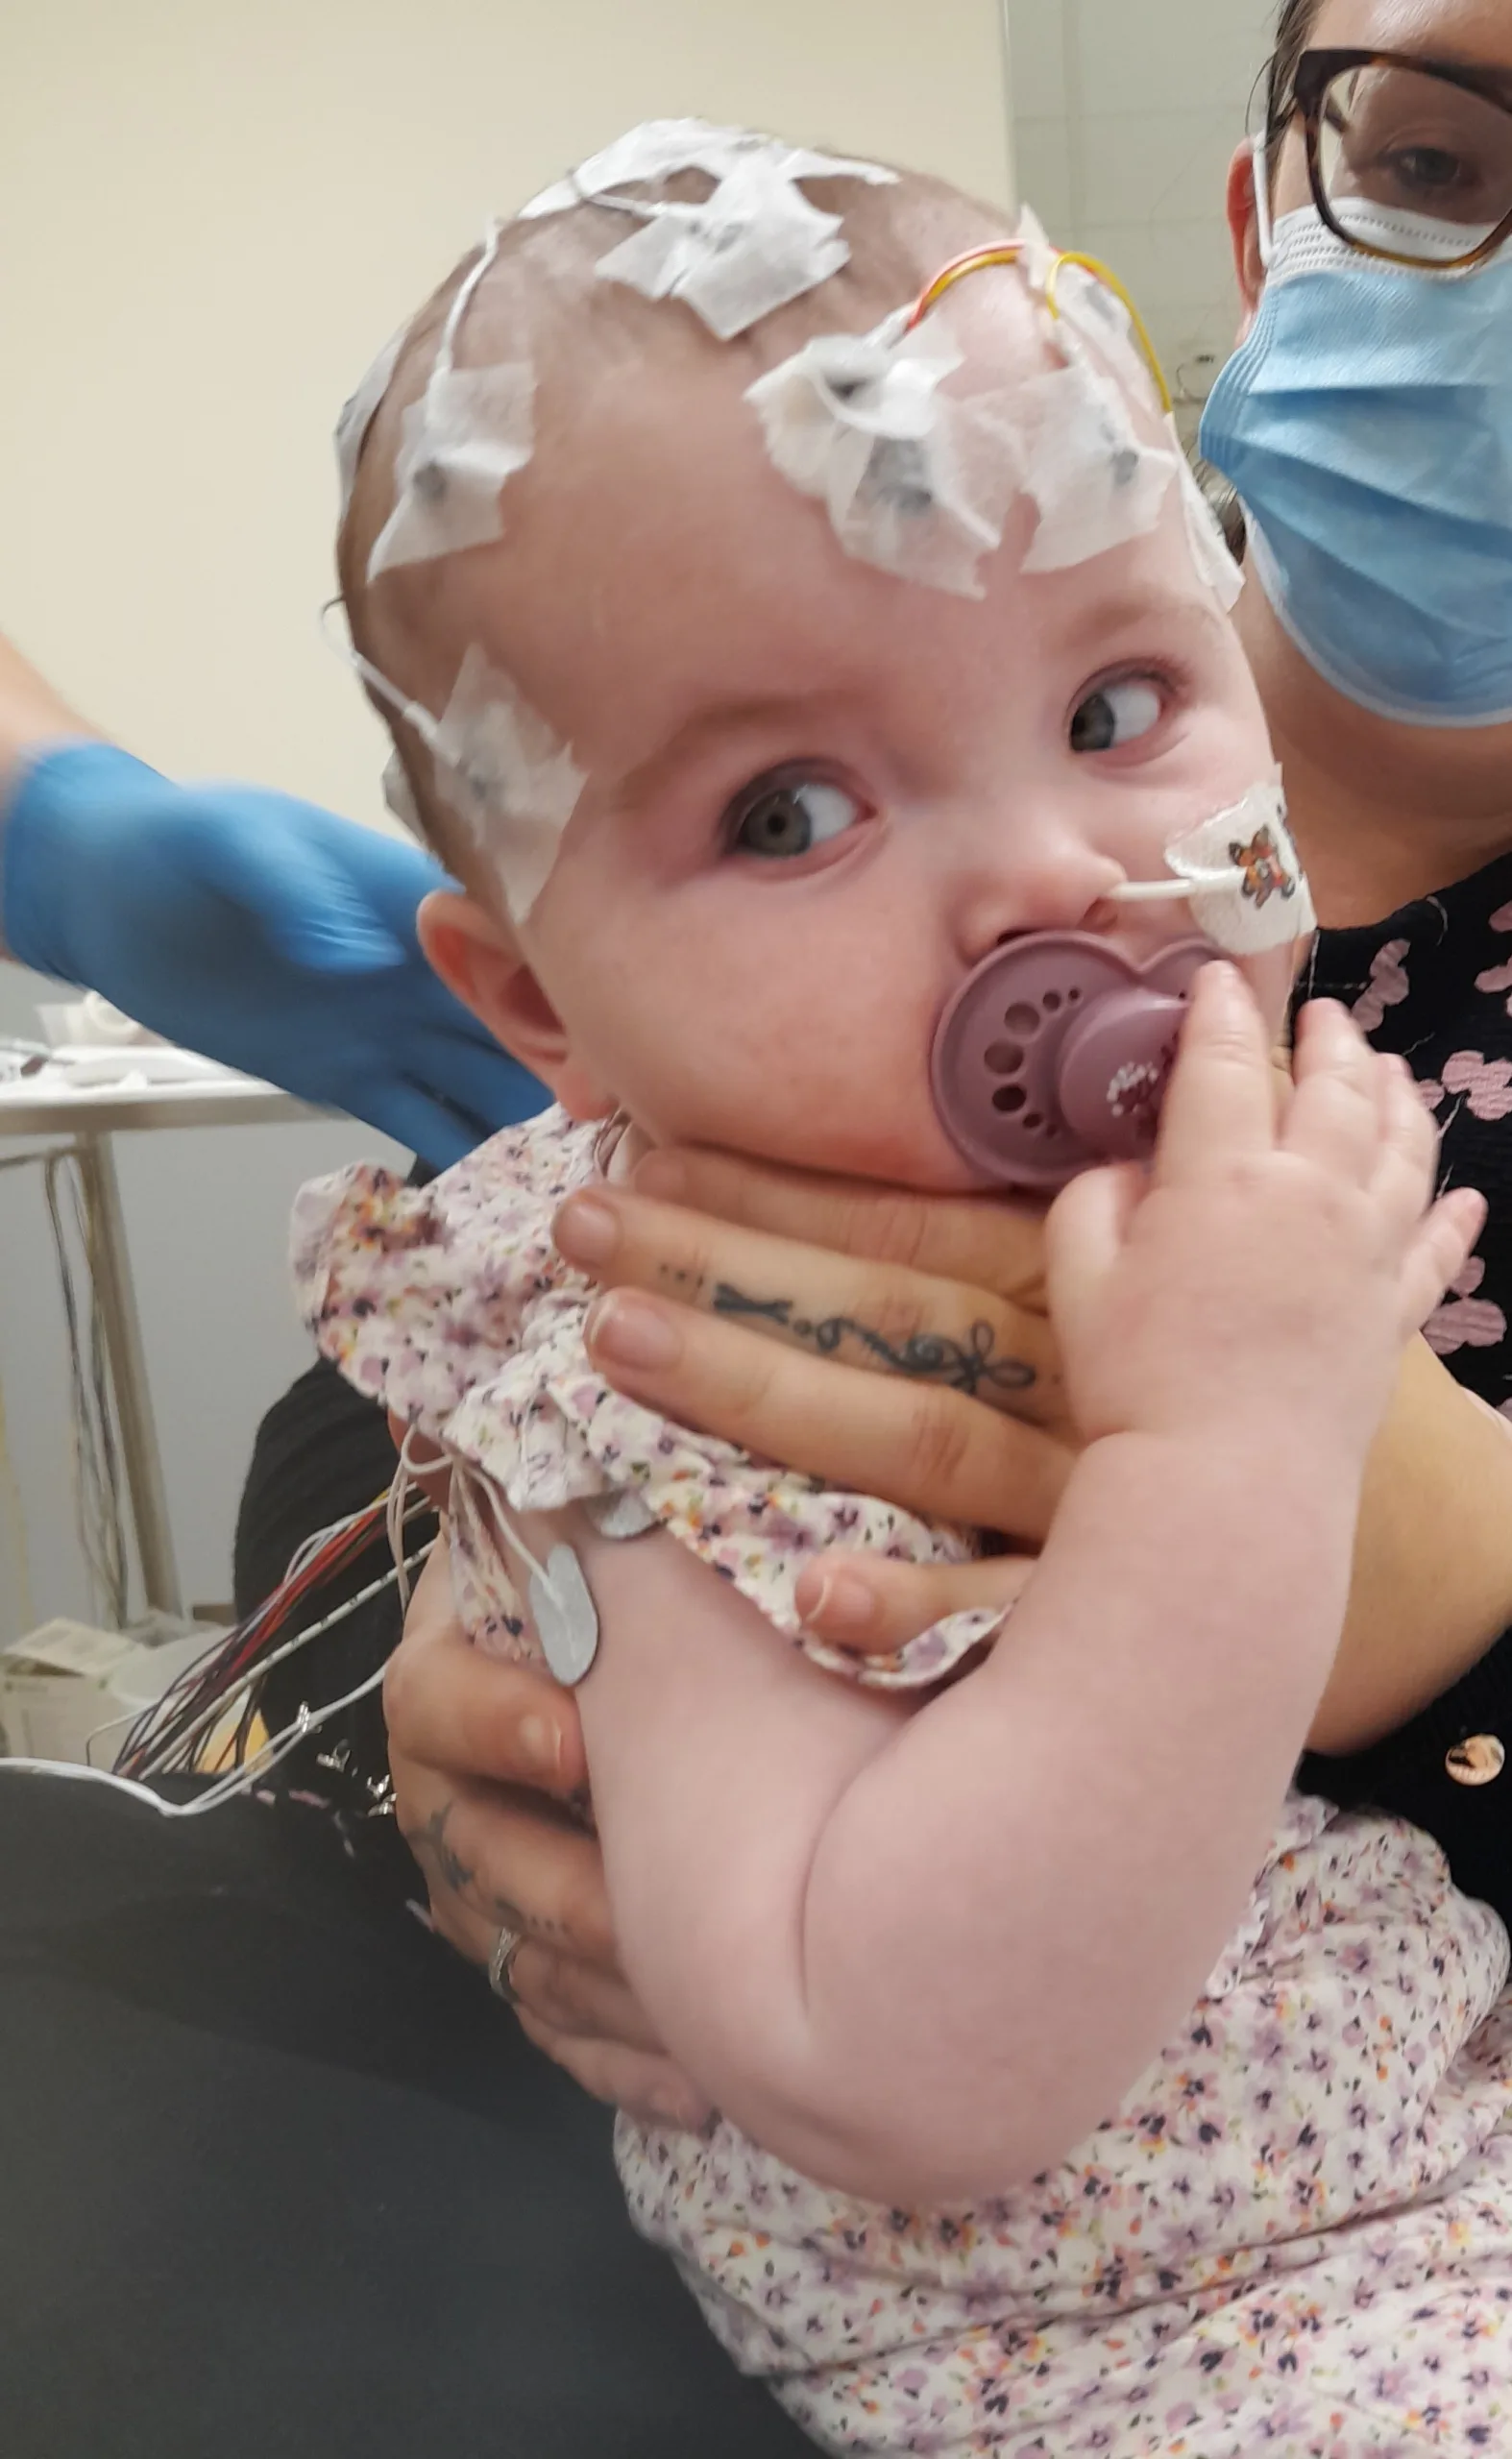 Iris-Rose is pictured with tape over her head and wires as a baby in hospital.